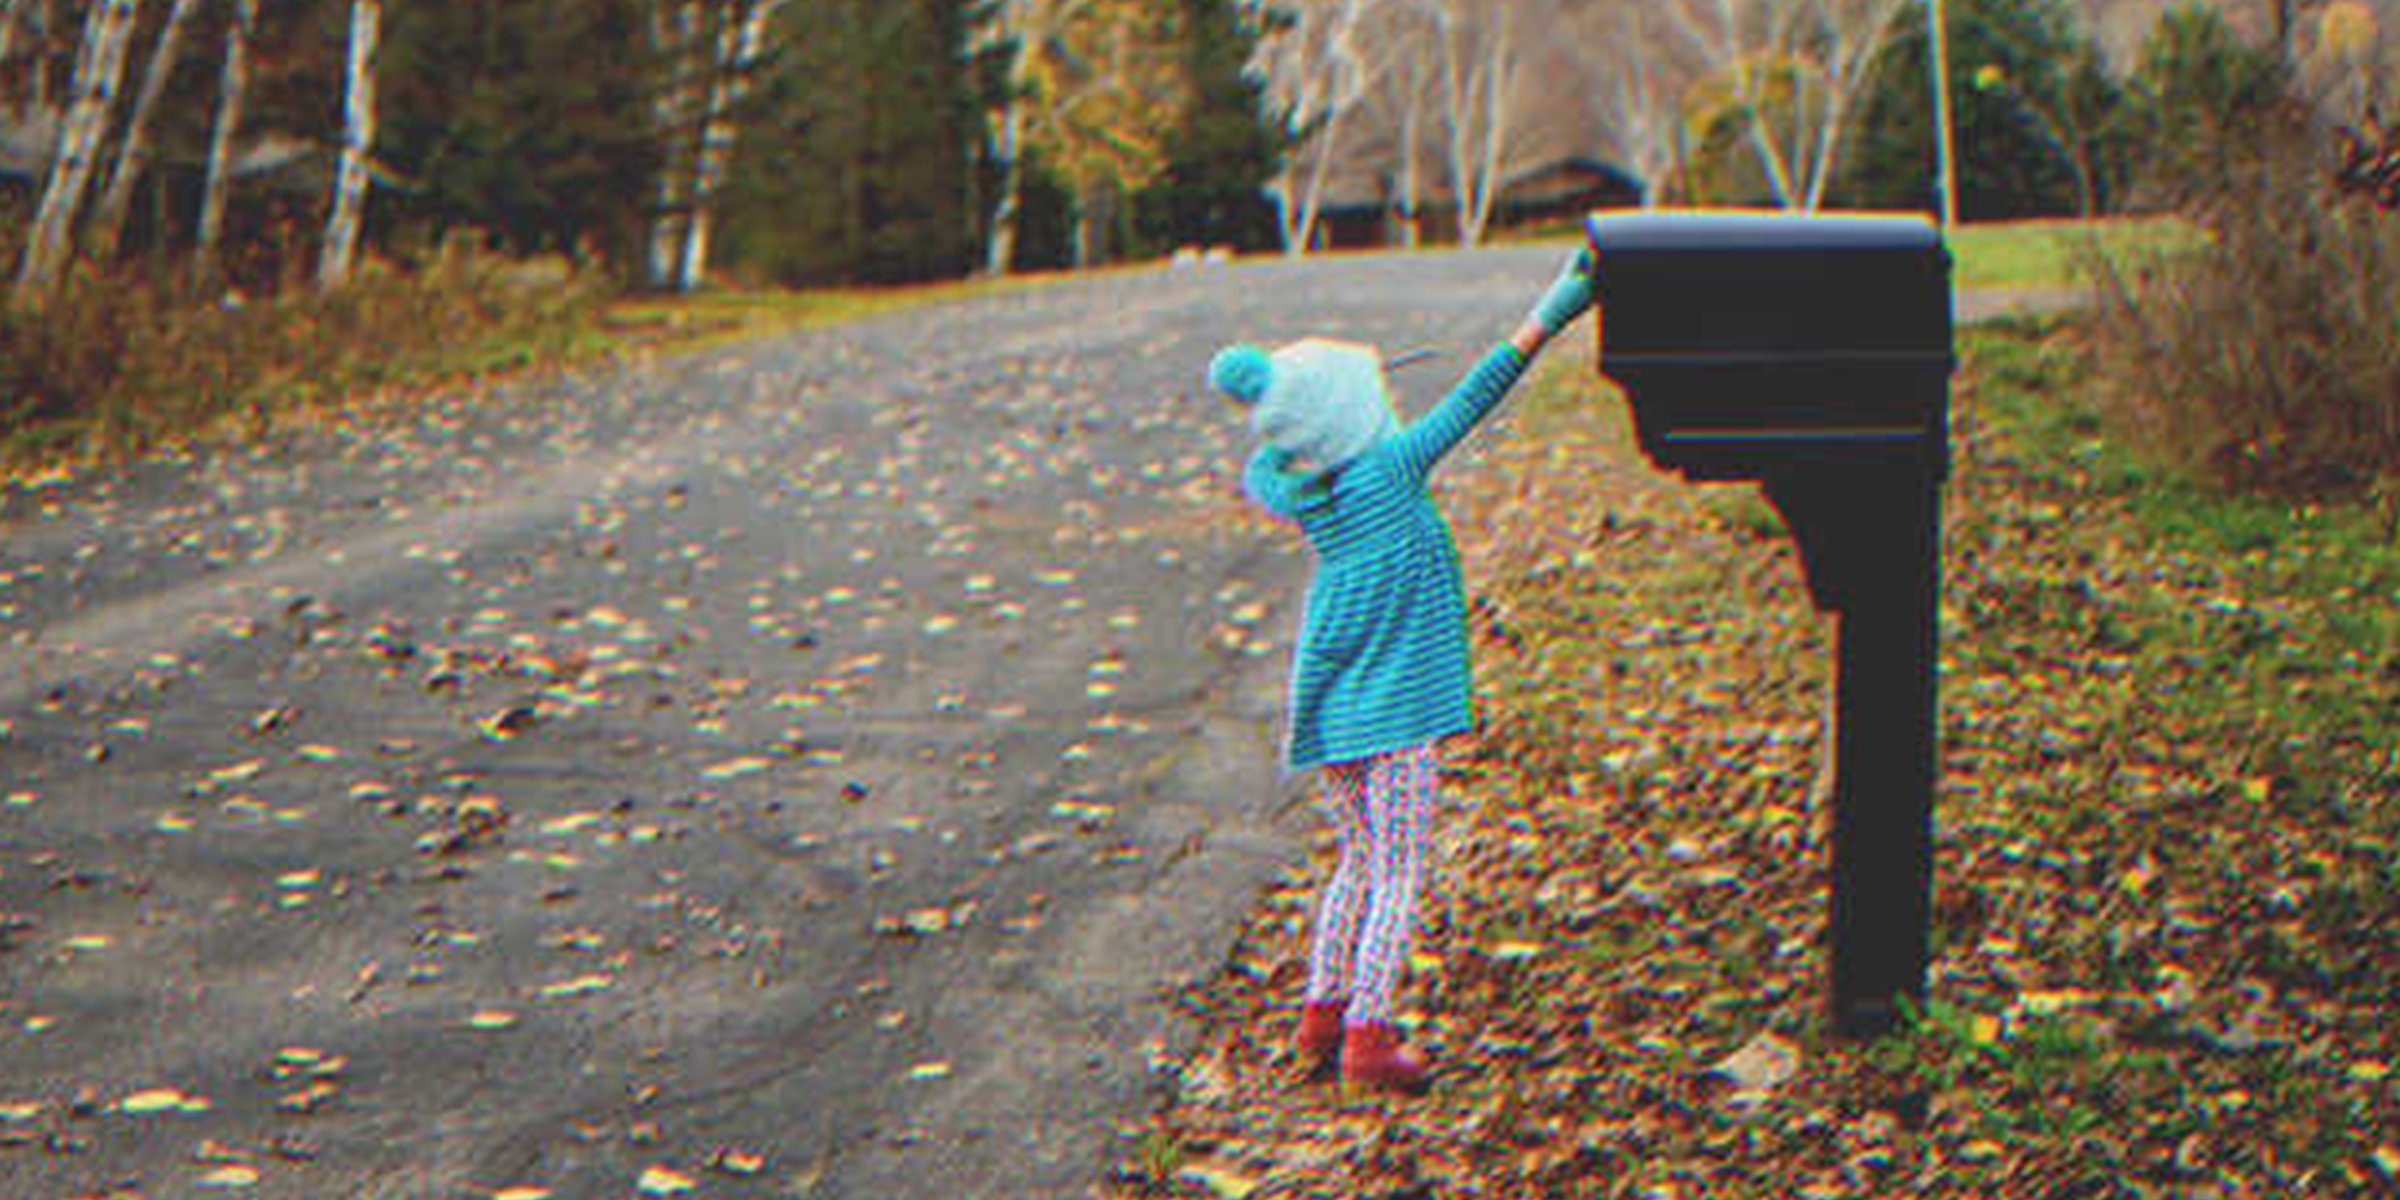 Little girl putting a letter into a mailbox | Source: Getty Images